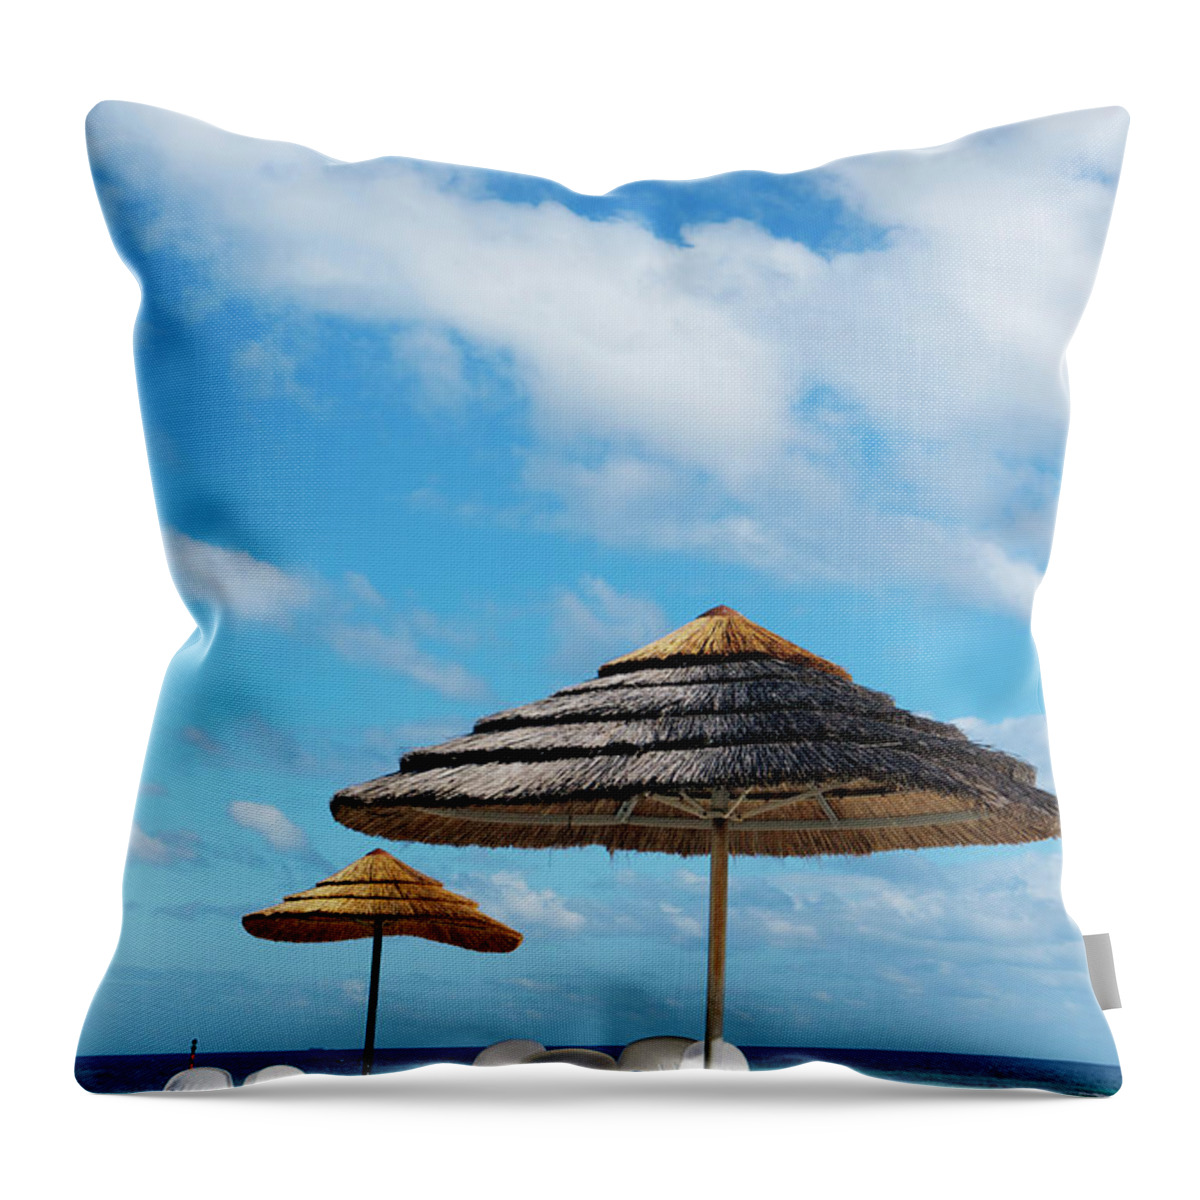 Tranquility Throw Pillow featuring the photograph Table And Chairs On Sand, Amedee Island by Oliver Strewe